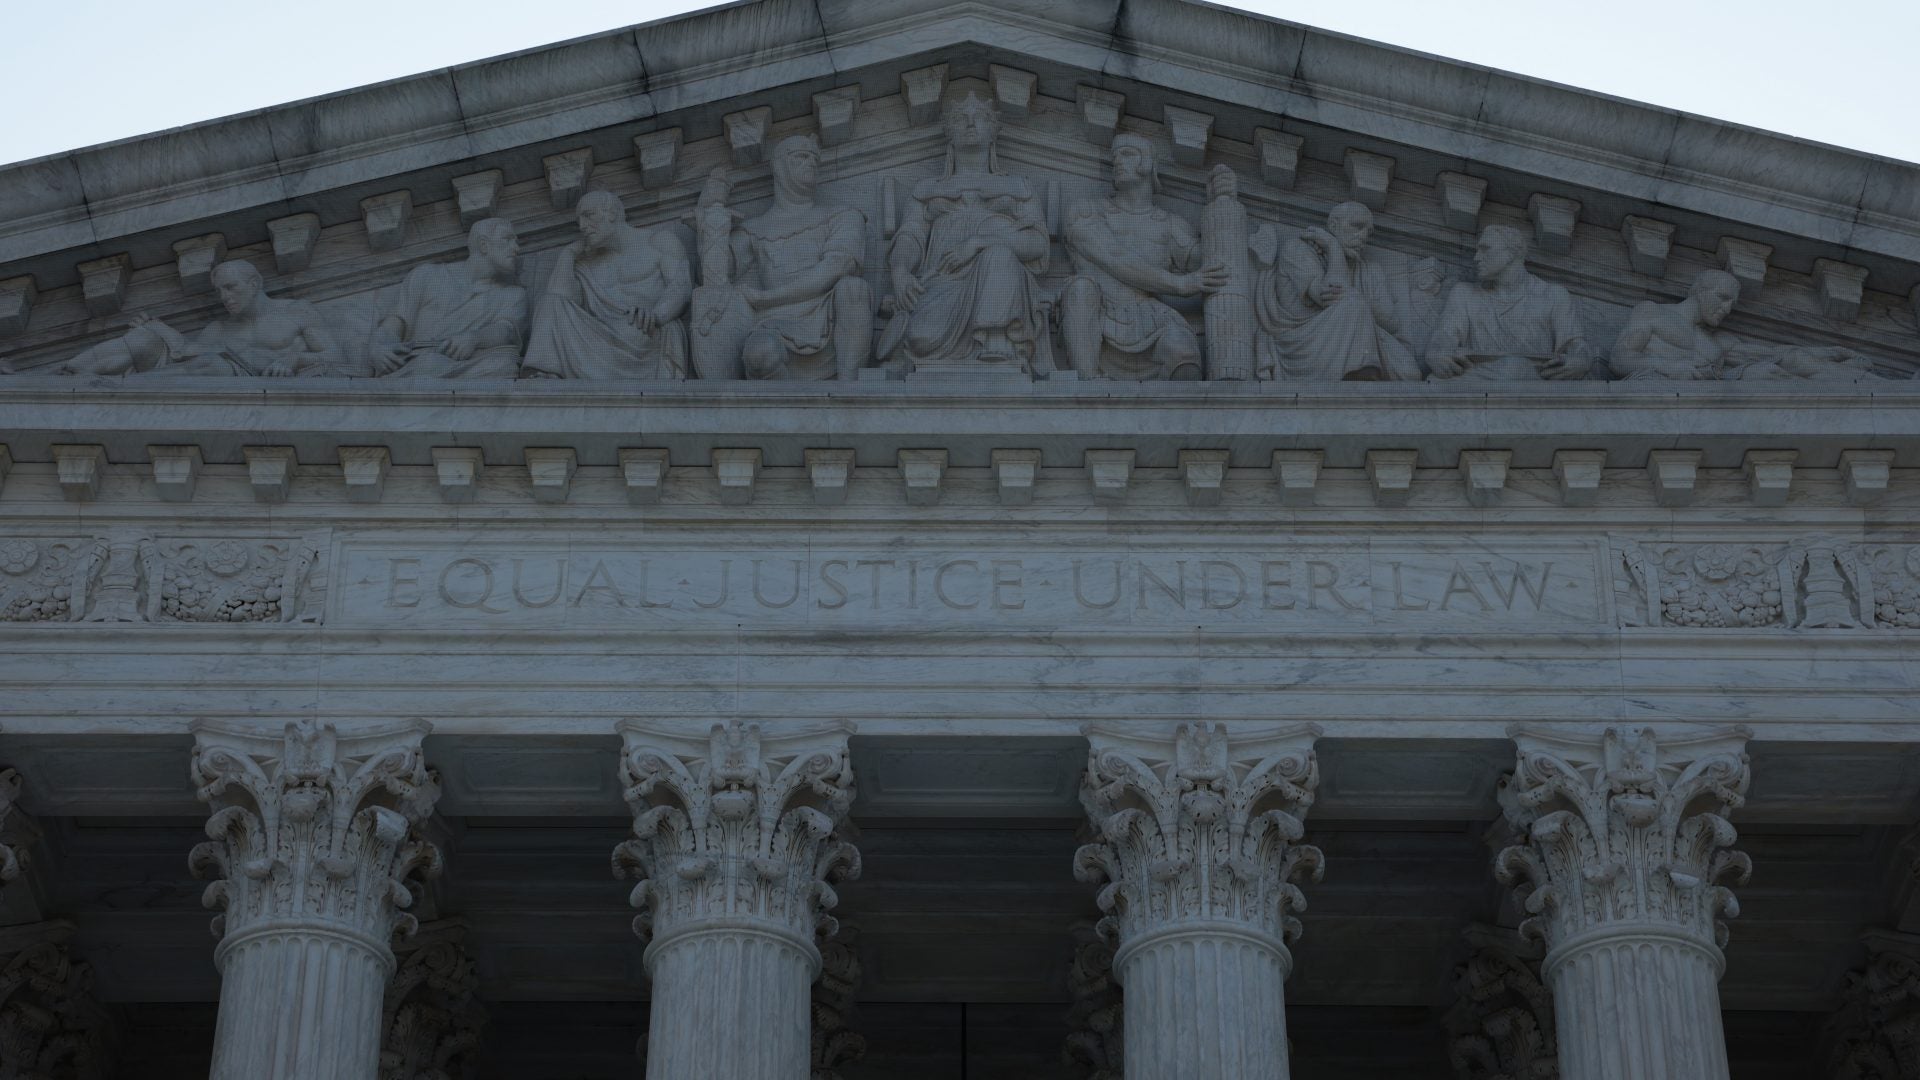 UPDATE: Supreme Court Officially Rules to Allow Texas Ban on Abortions